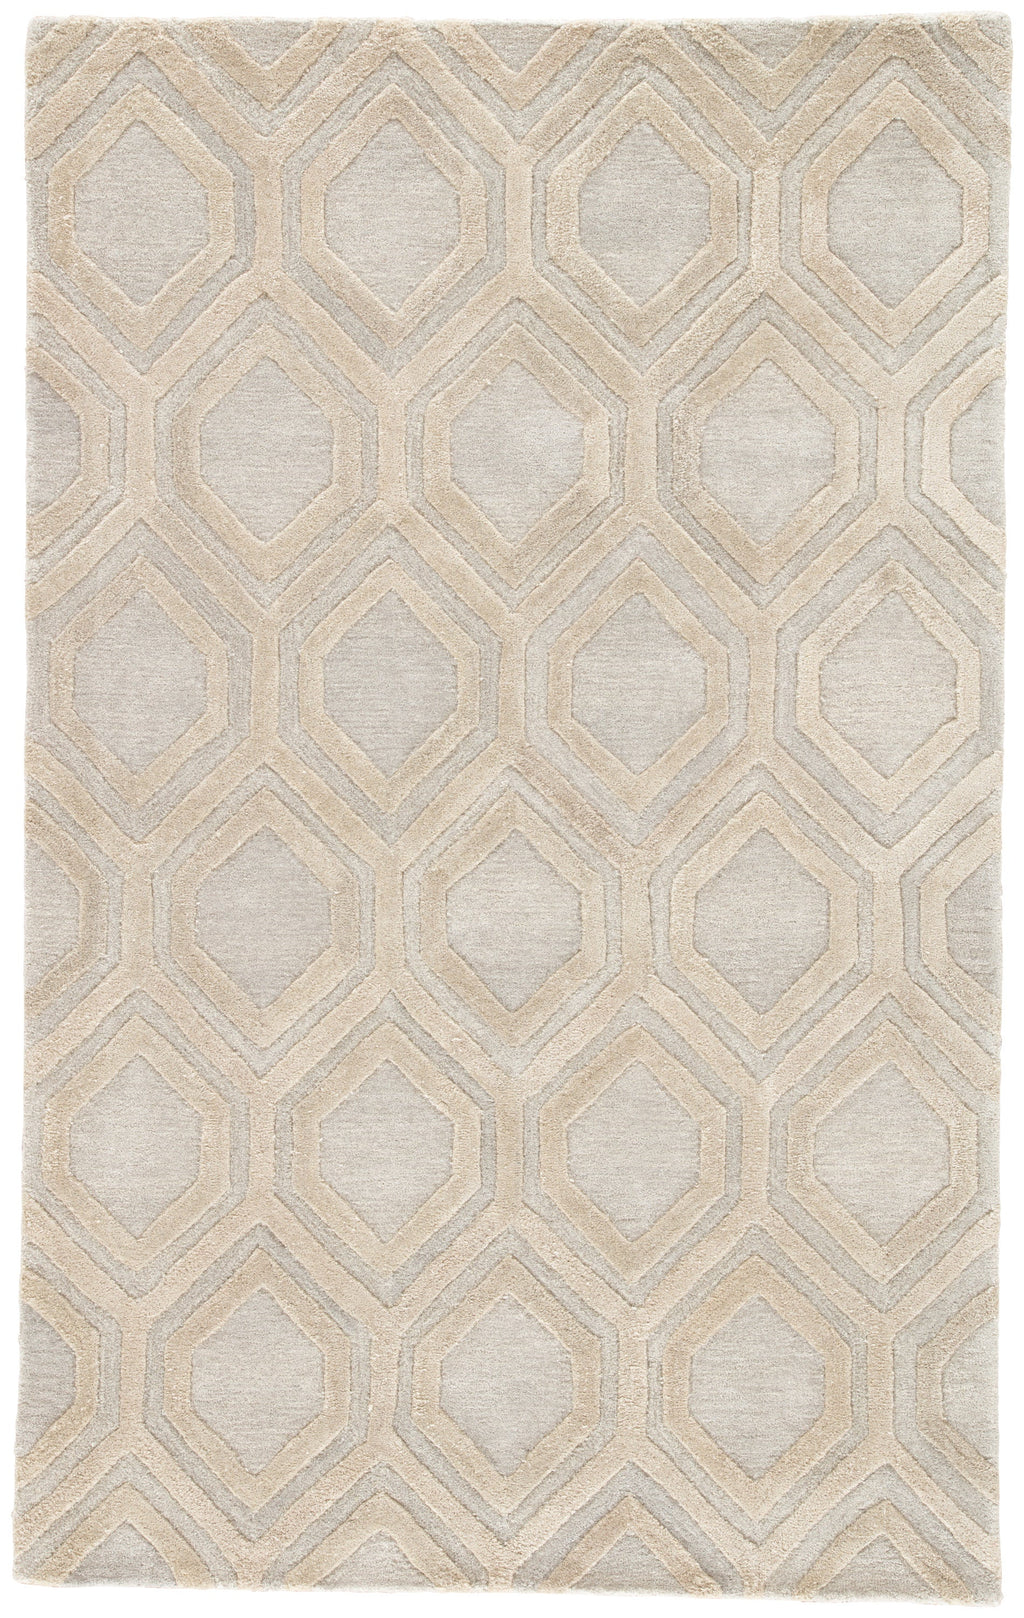 hassan trellis rug in chateau gray goat design by jaipur 1